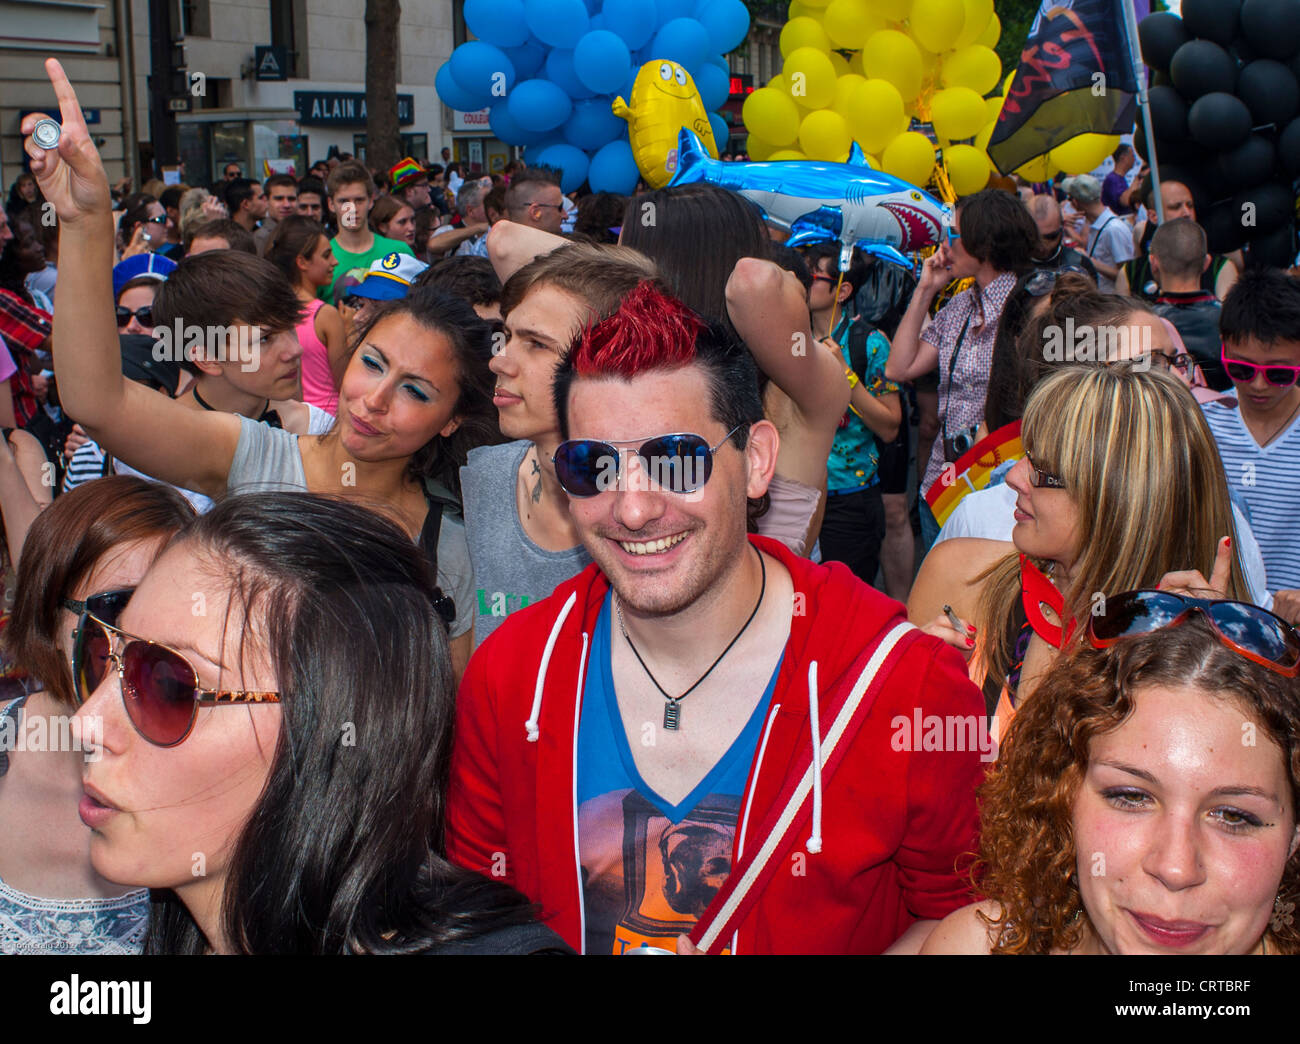 Paris, France, young lesbians and gay men, Crowd of French Teens Partying at Gay Pride (LGBT) pride march Stock Photo